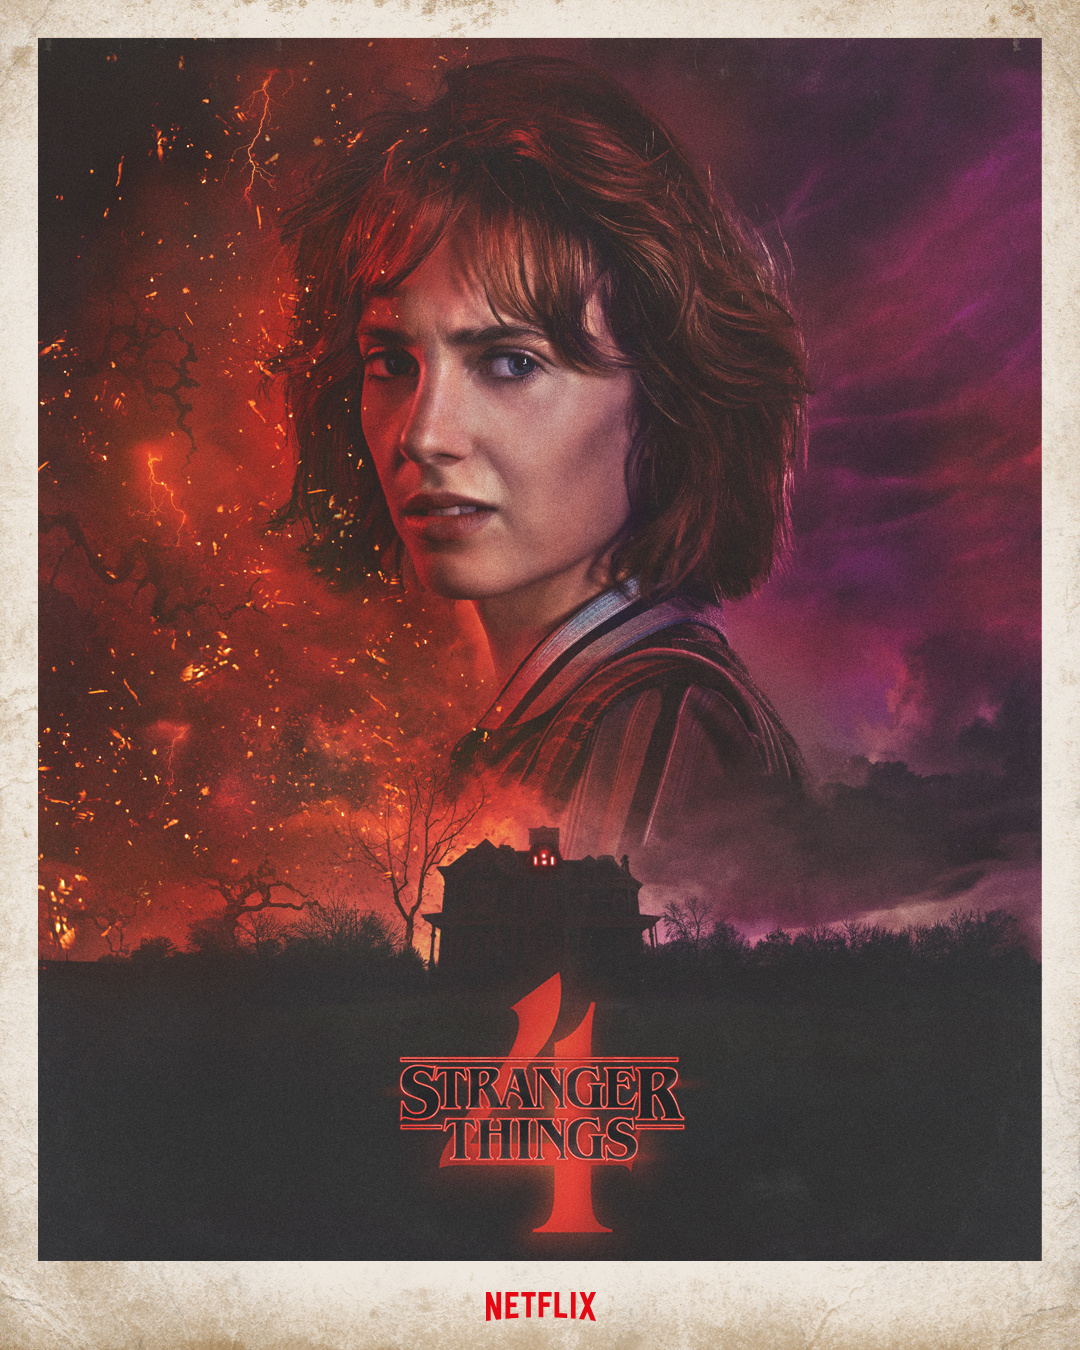 New Stranger Things 3 Posters Reveal New Characters - GameSpot